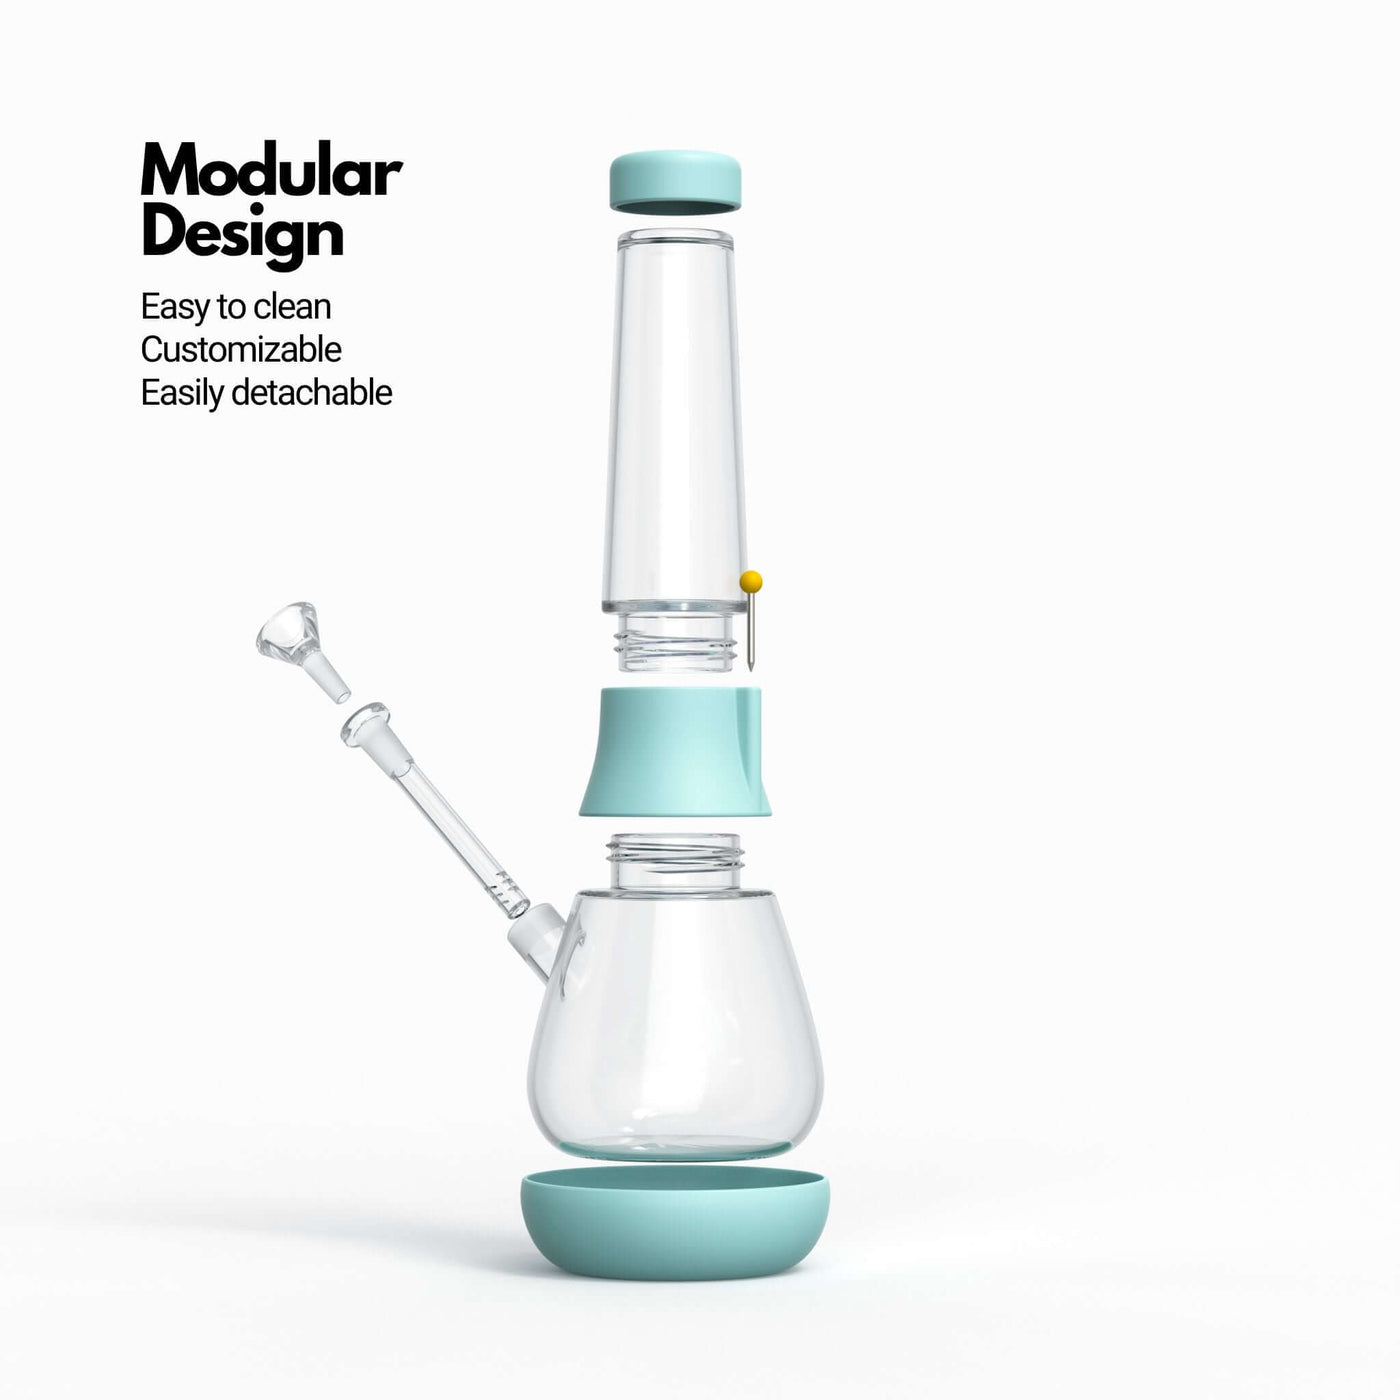 Exploded view infographic of Weeday modular bong (in sky blue color), highlighting its customizable and detachable features.